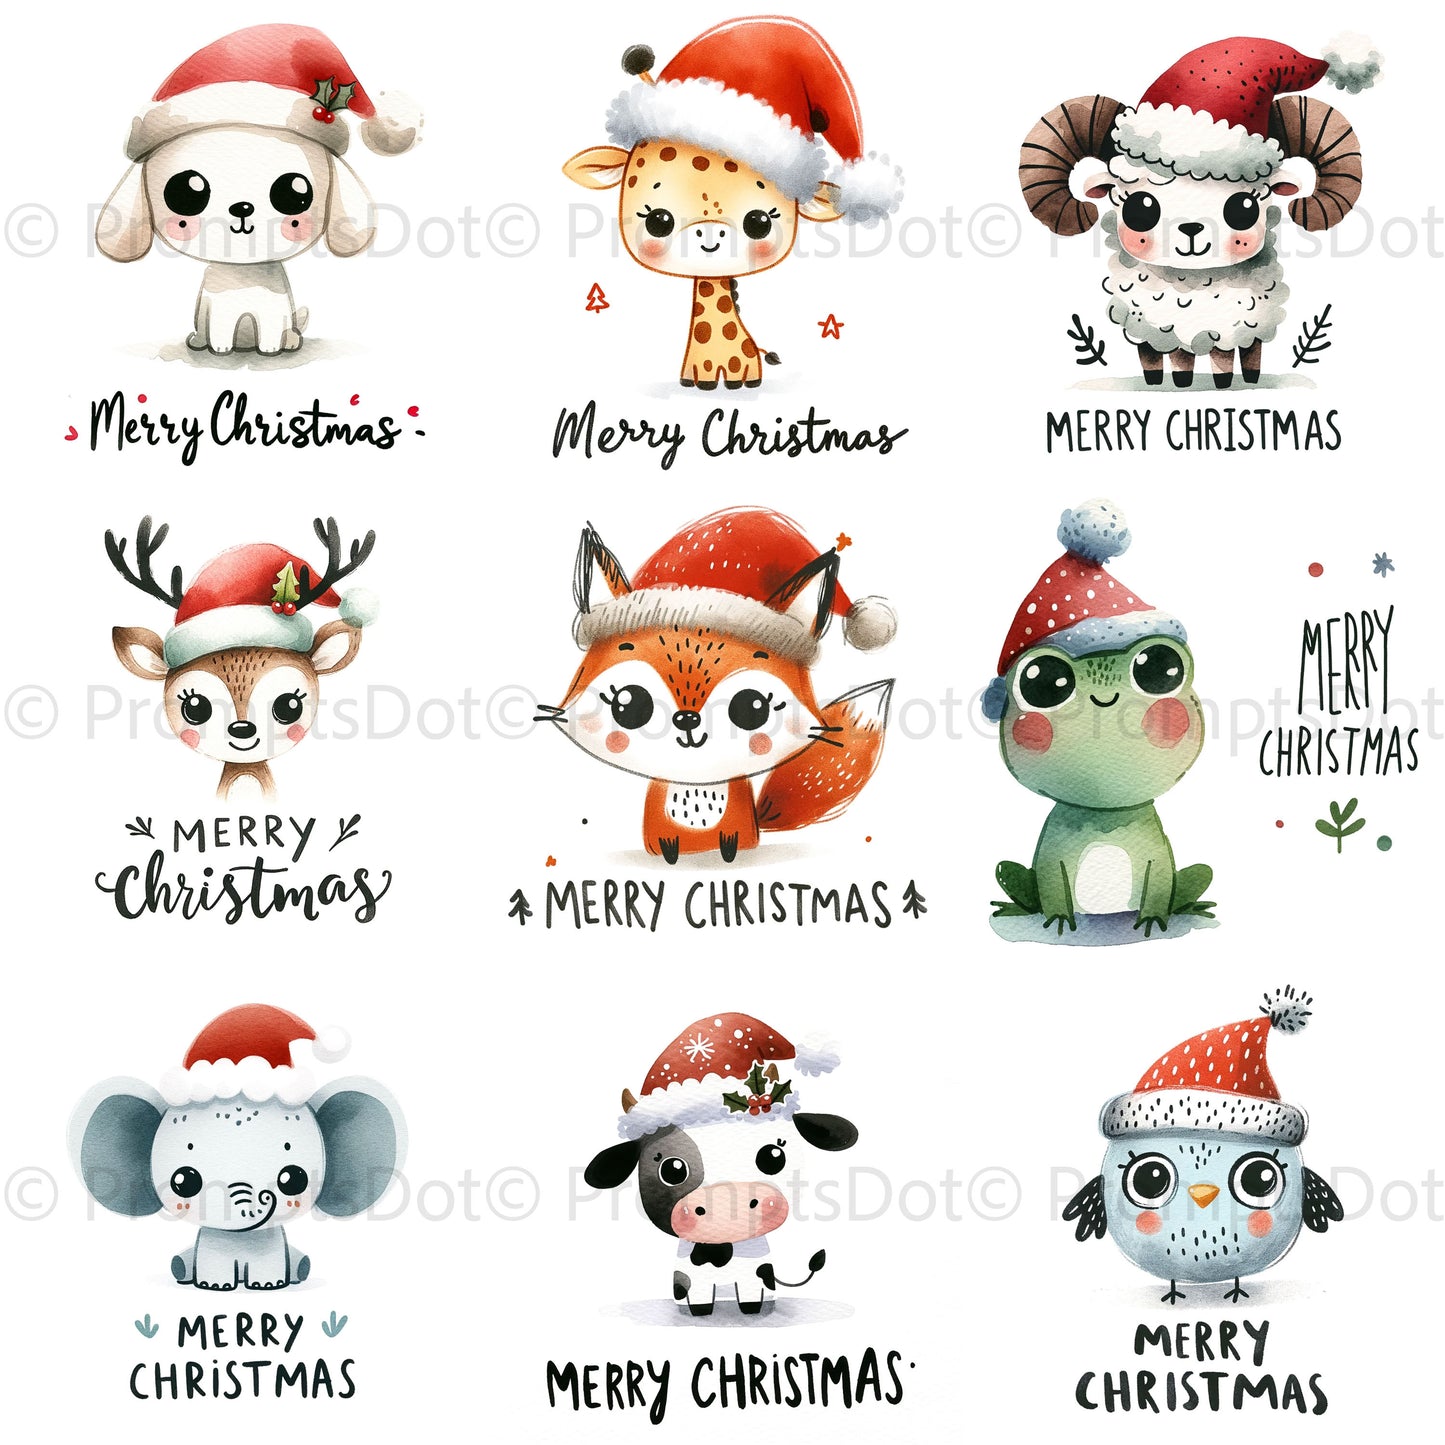 Cute Christmas Illustrations with Text DALL-E 3 Prompt